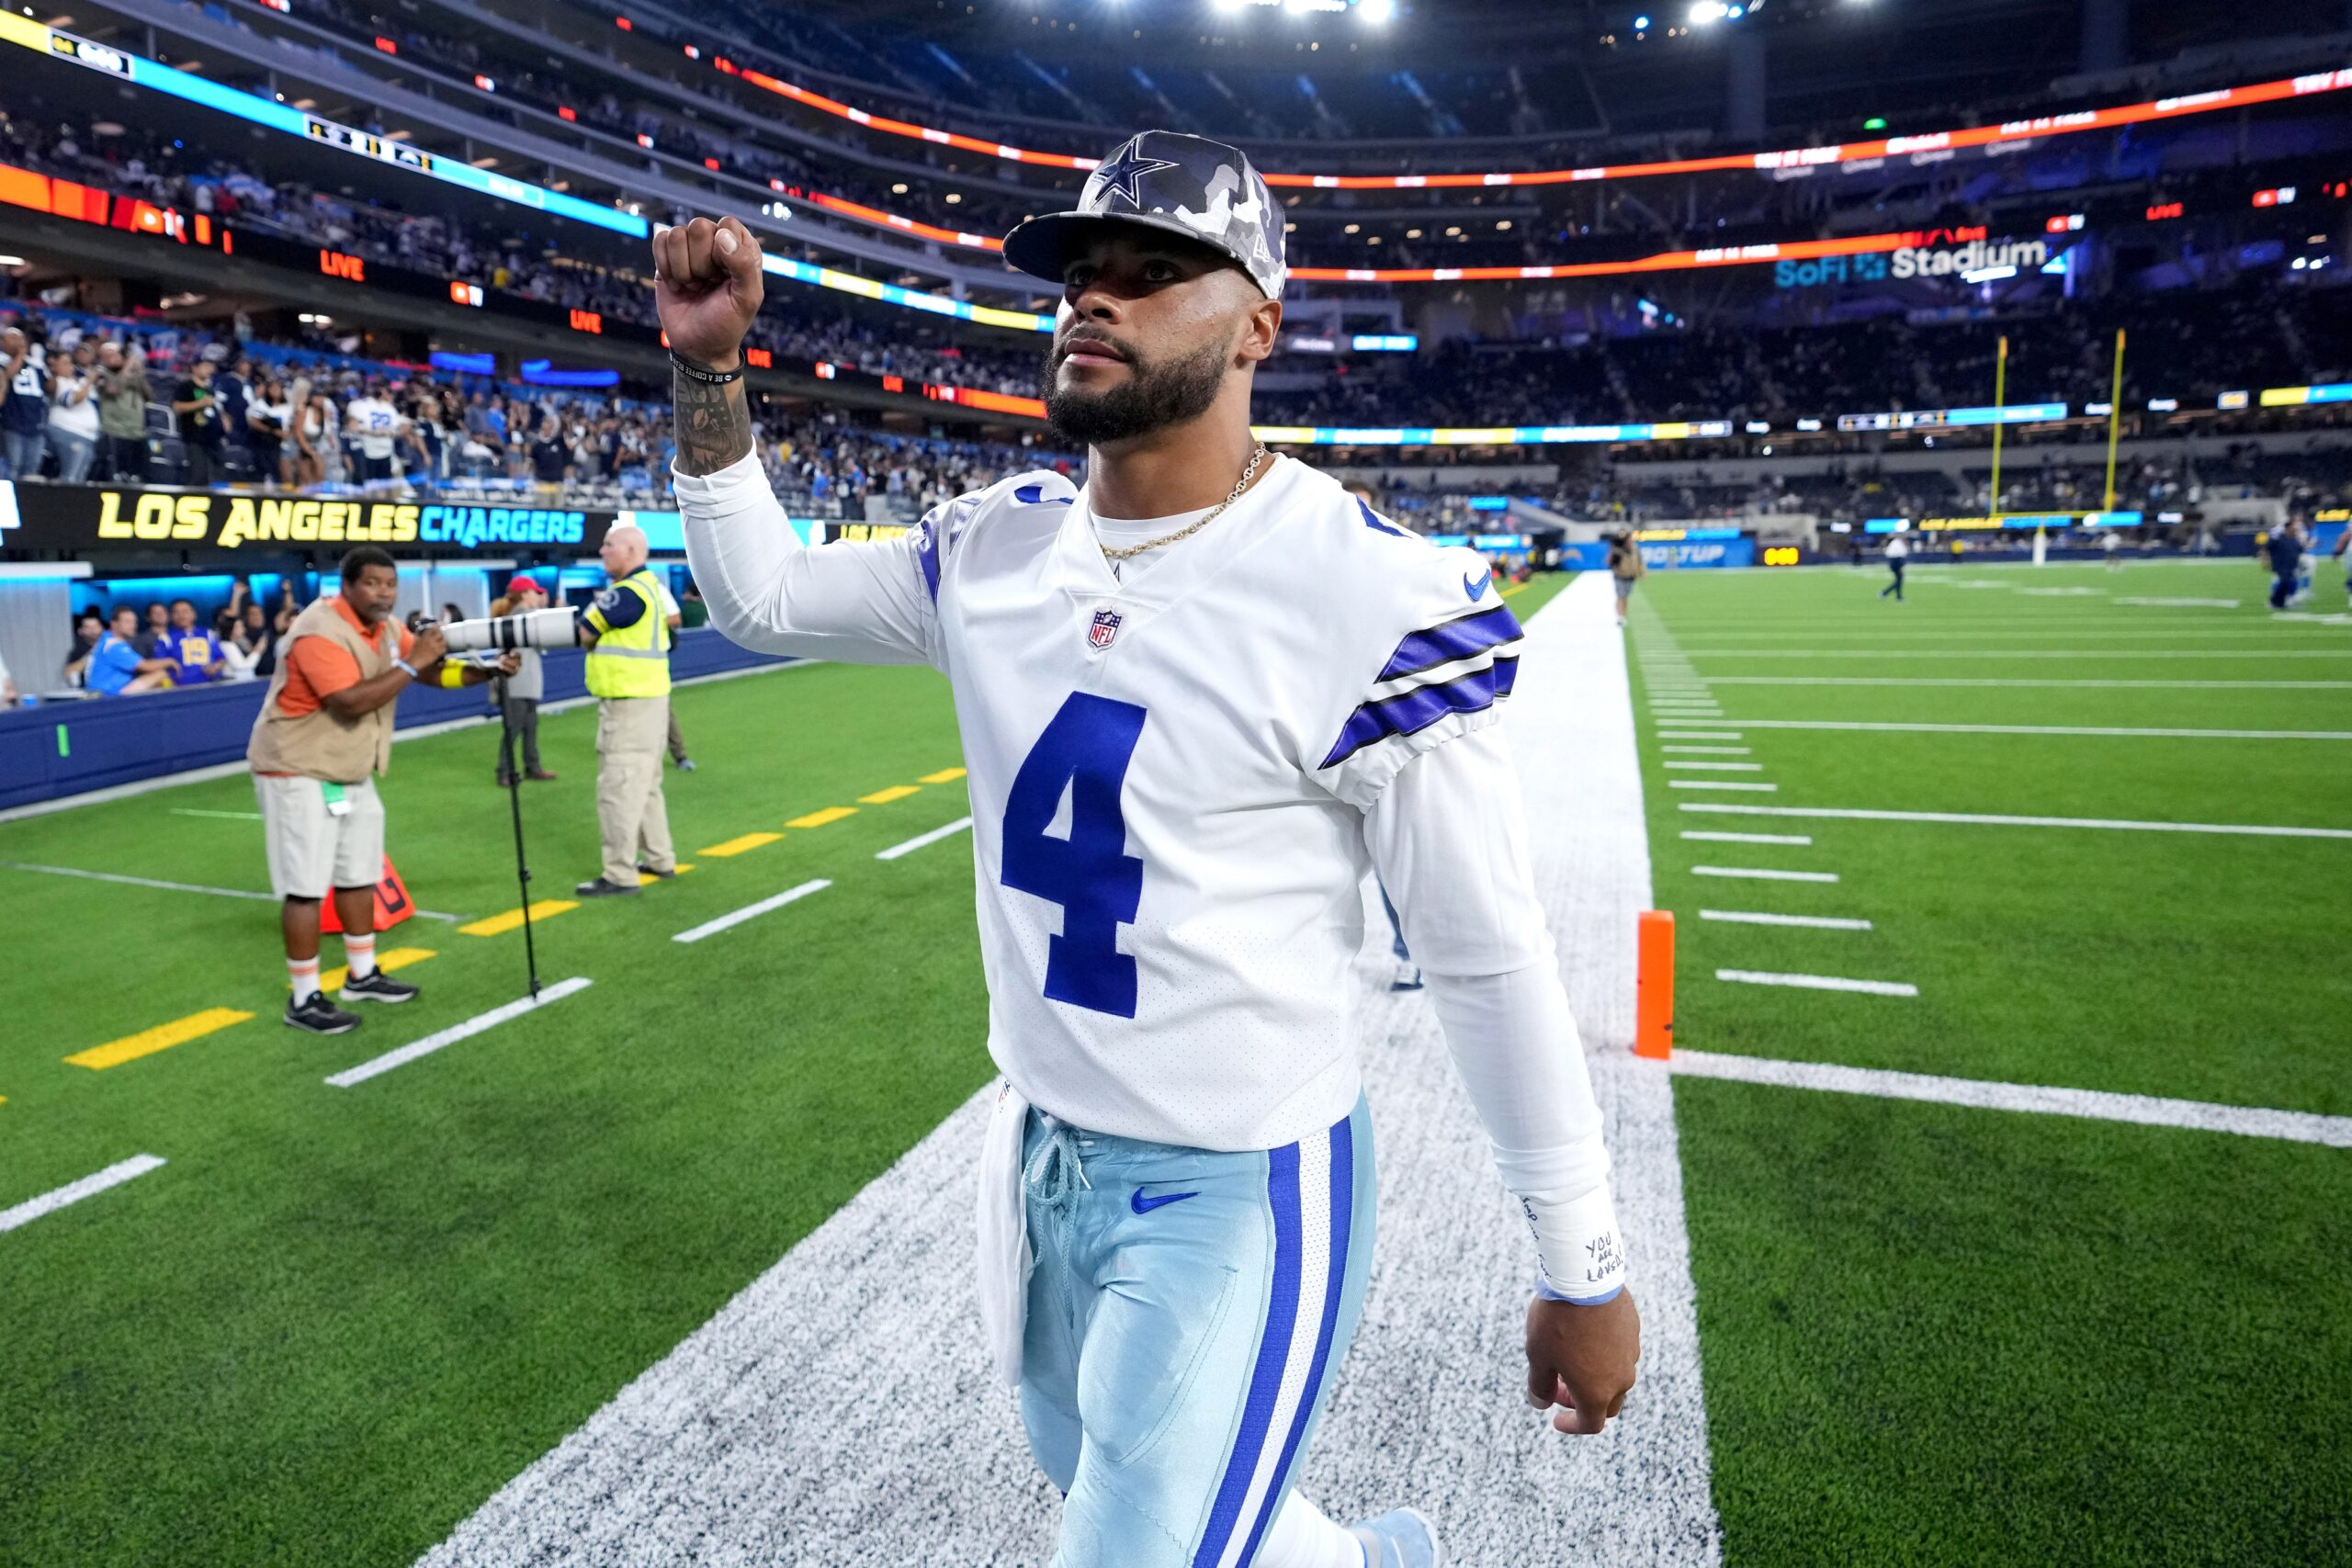 Observations From the Dallas Cowboys Dominating 38-3 Win Over the